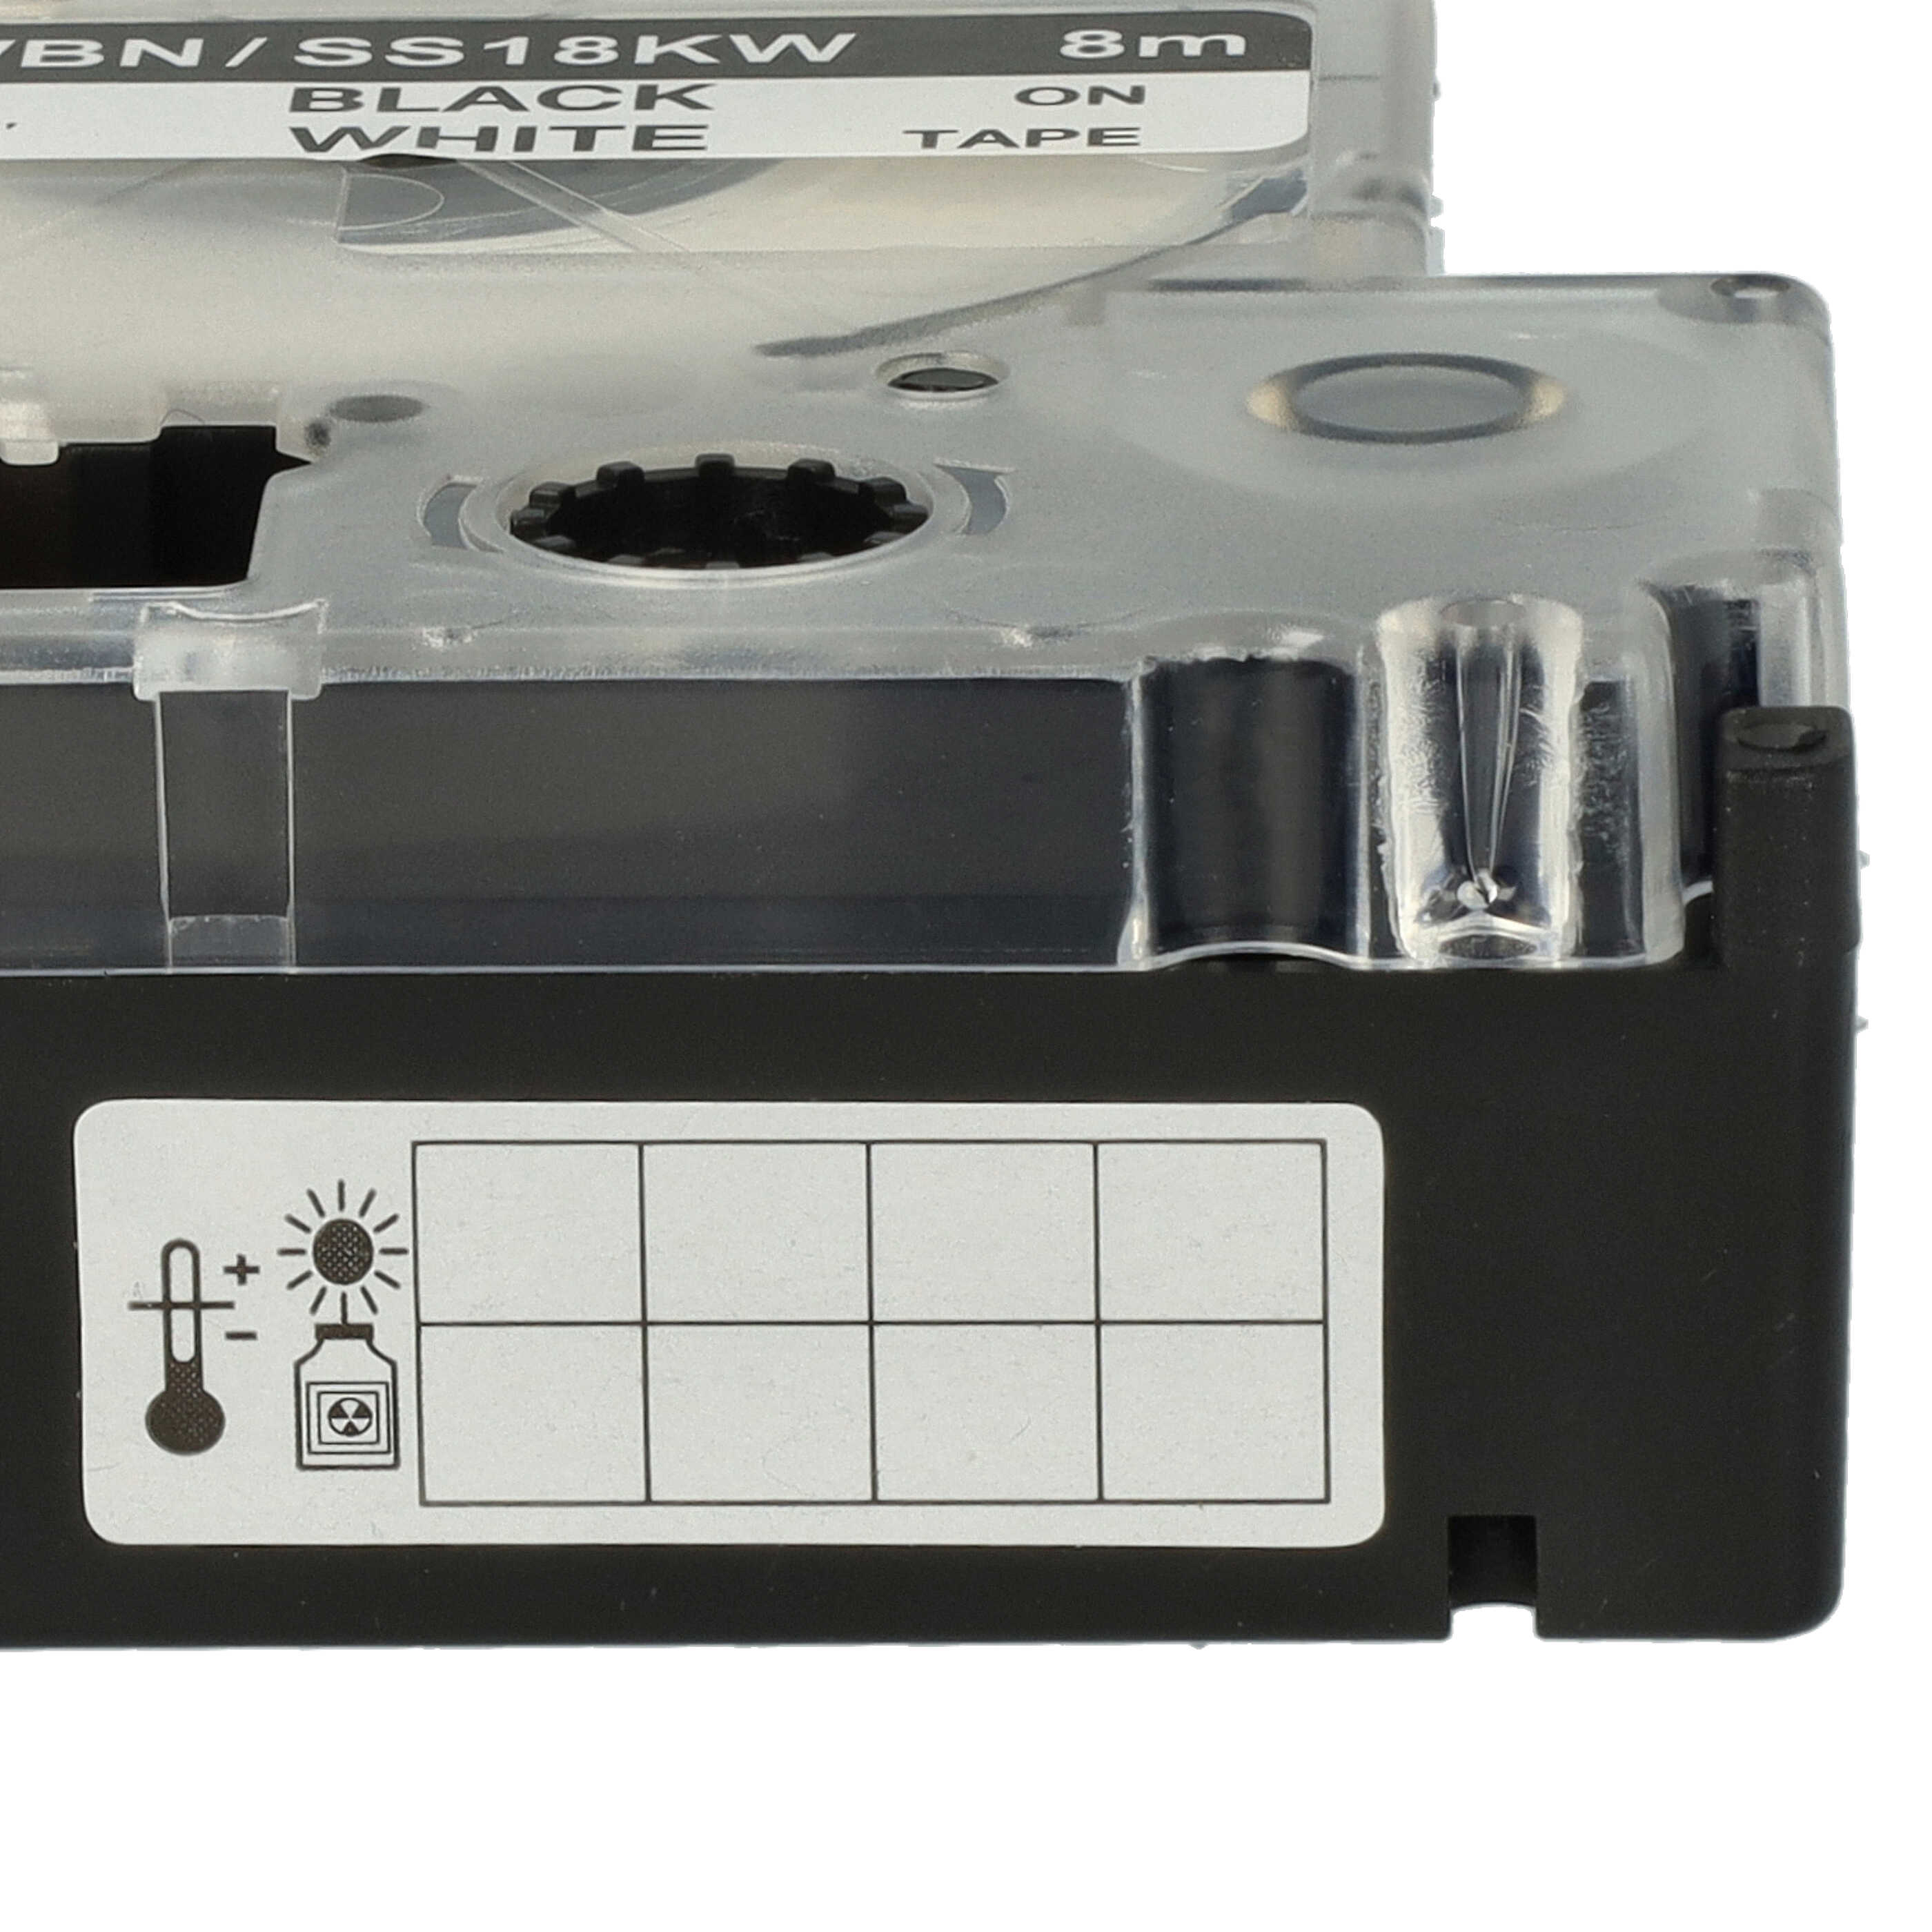 3x Label Tape as Replacement for Epson SS18KW, LC-5WBN - 18 mm Black to White